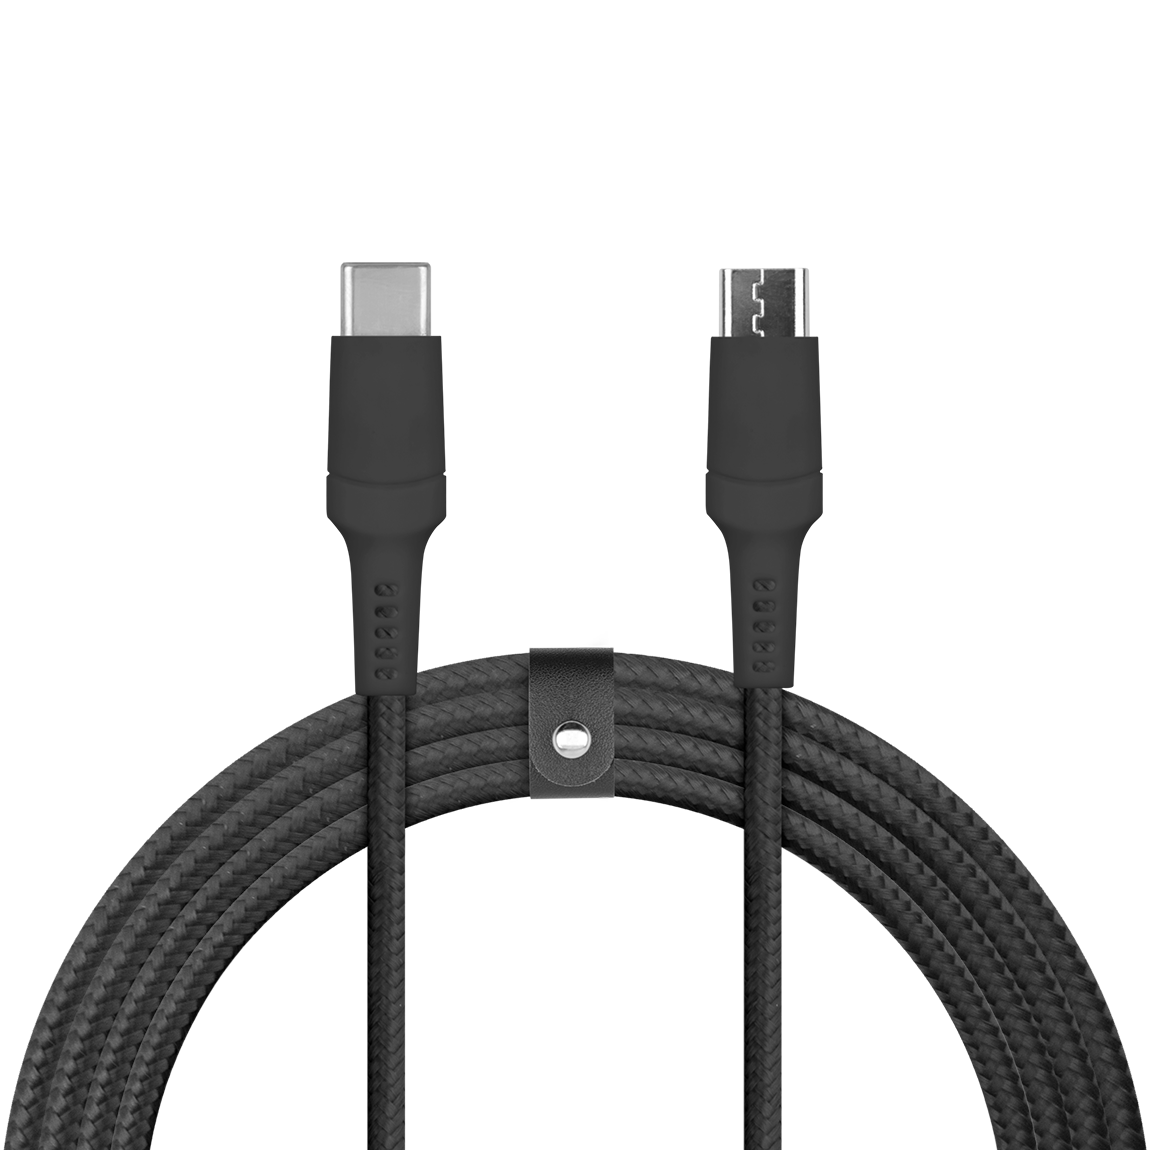 Piston Connect Braid USB Type-C to Micro USB Cable